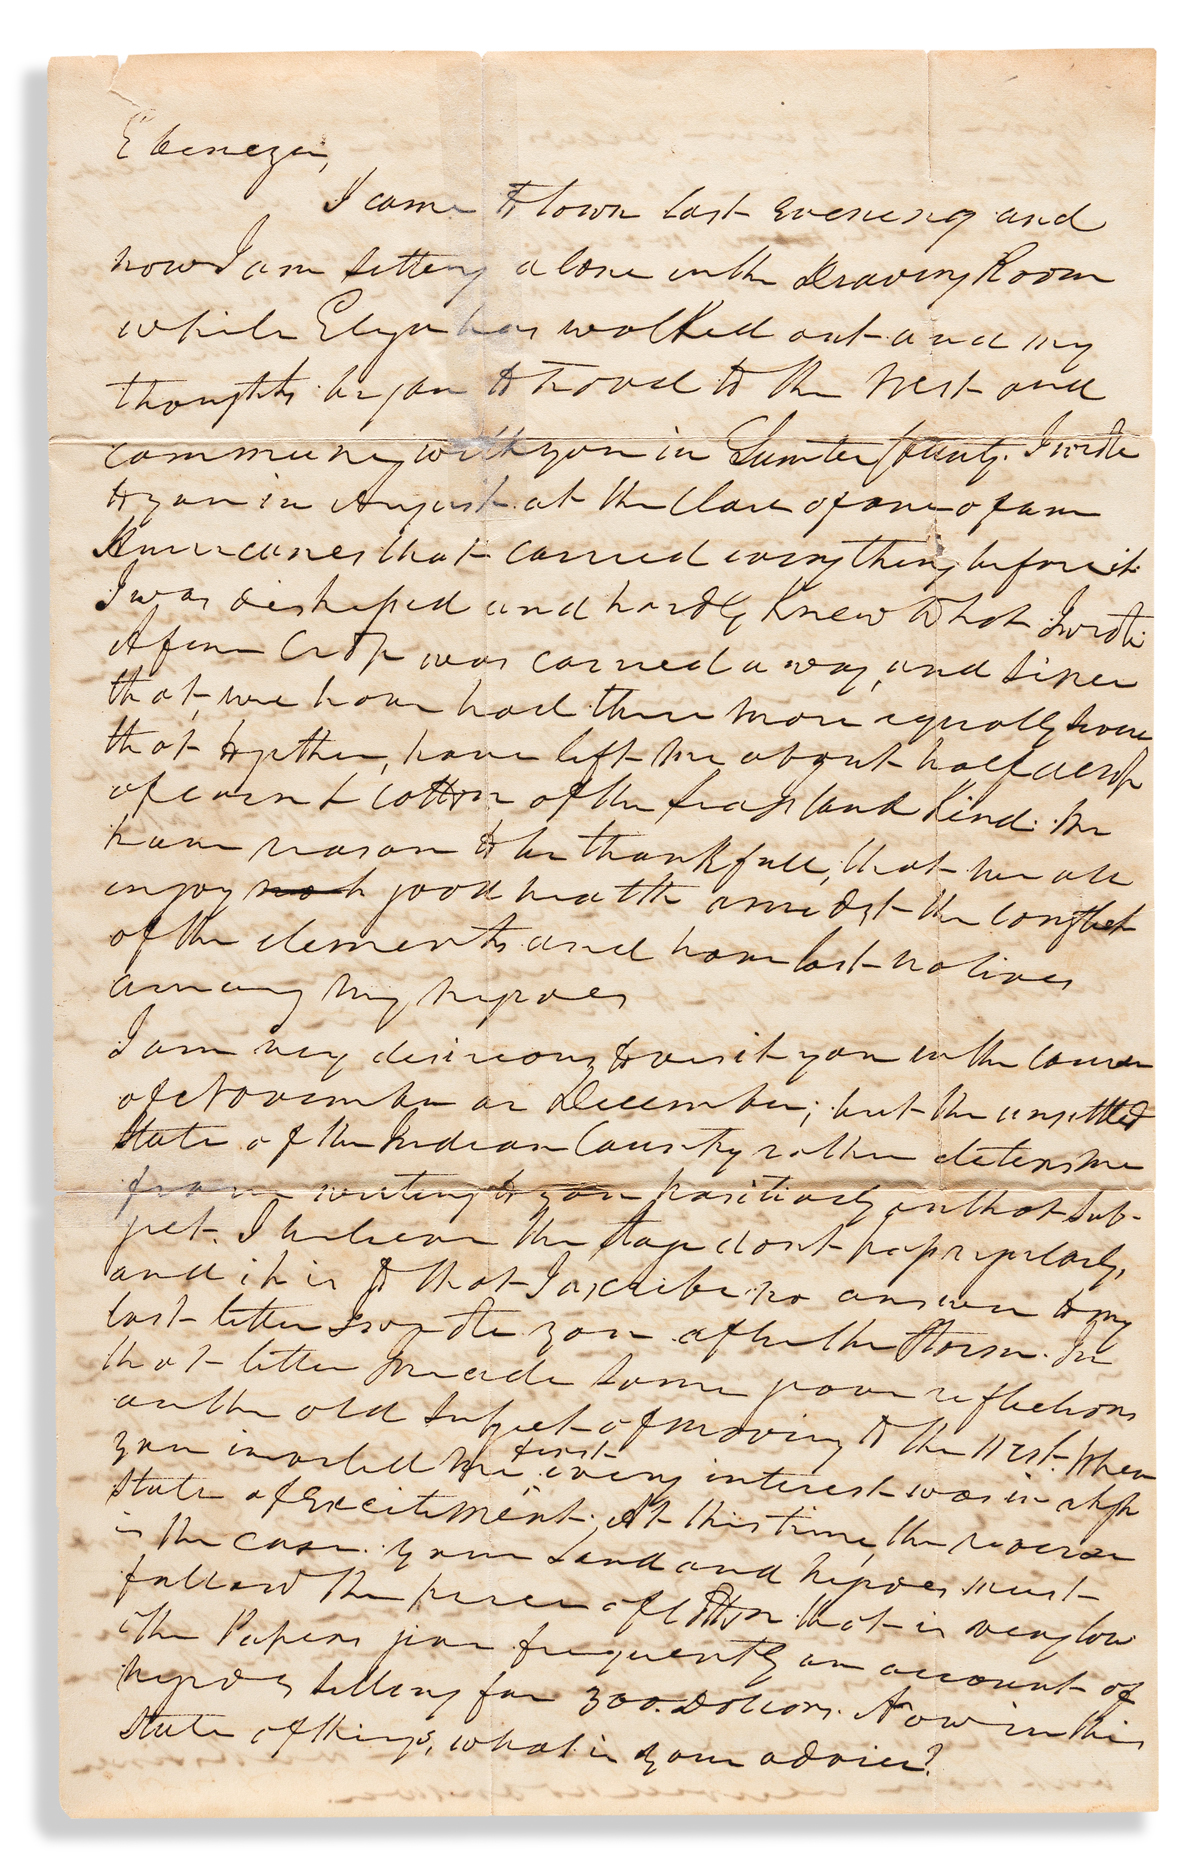 (AMERICAN INDIANS.) Robert H. Pettigrew. Letter by a Georgia planter discussing the Creek War in Alabama.